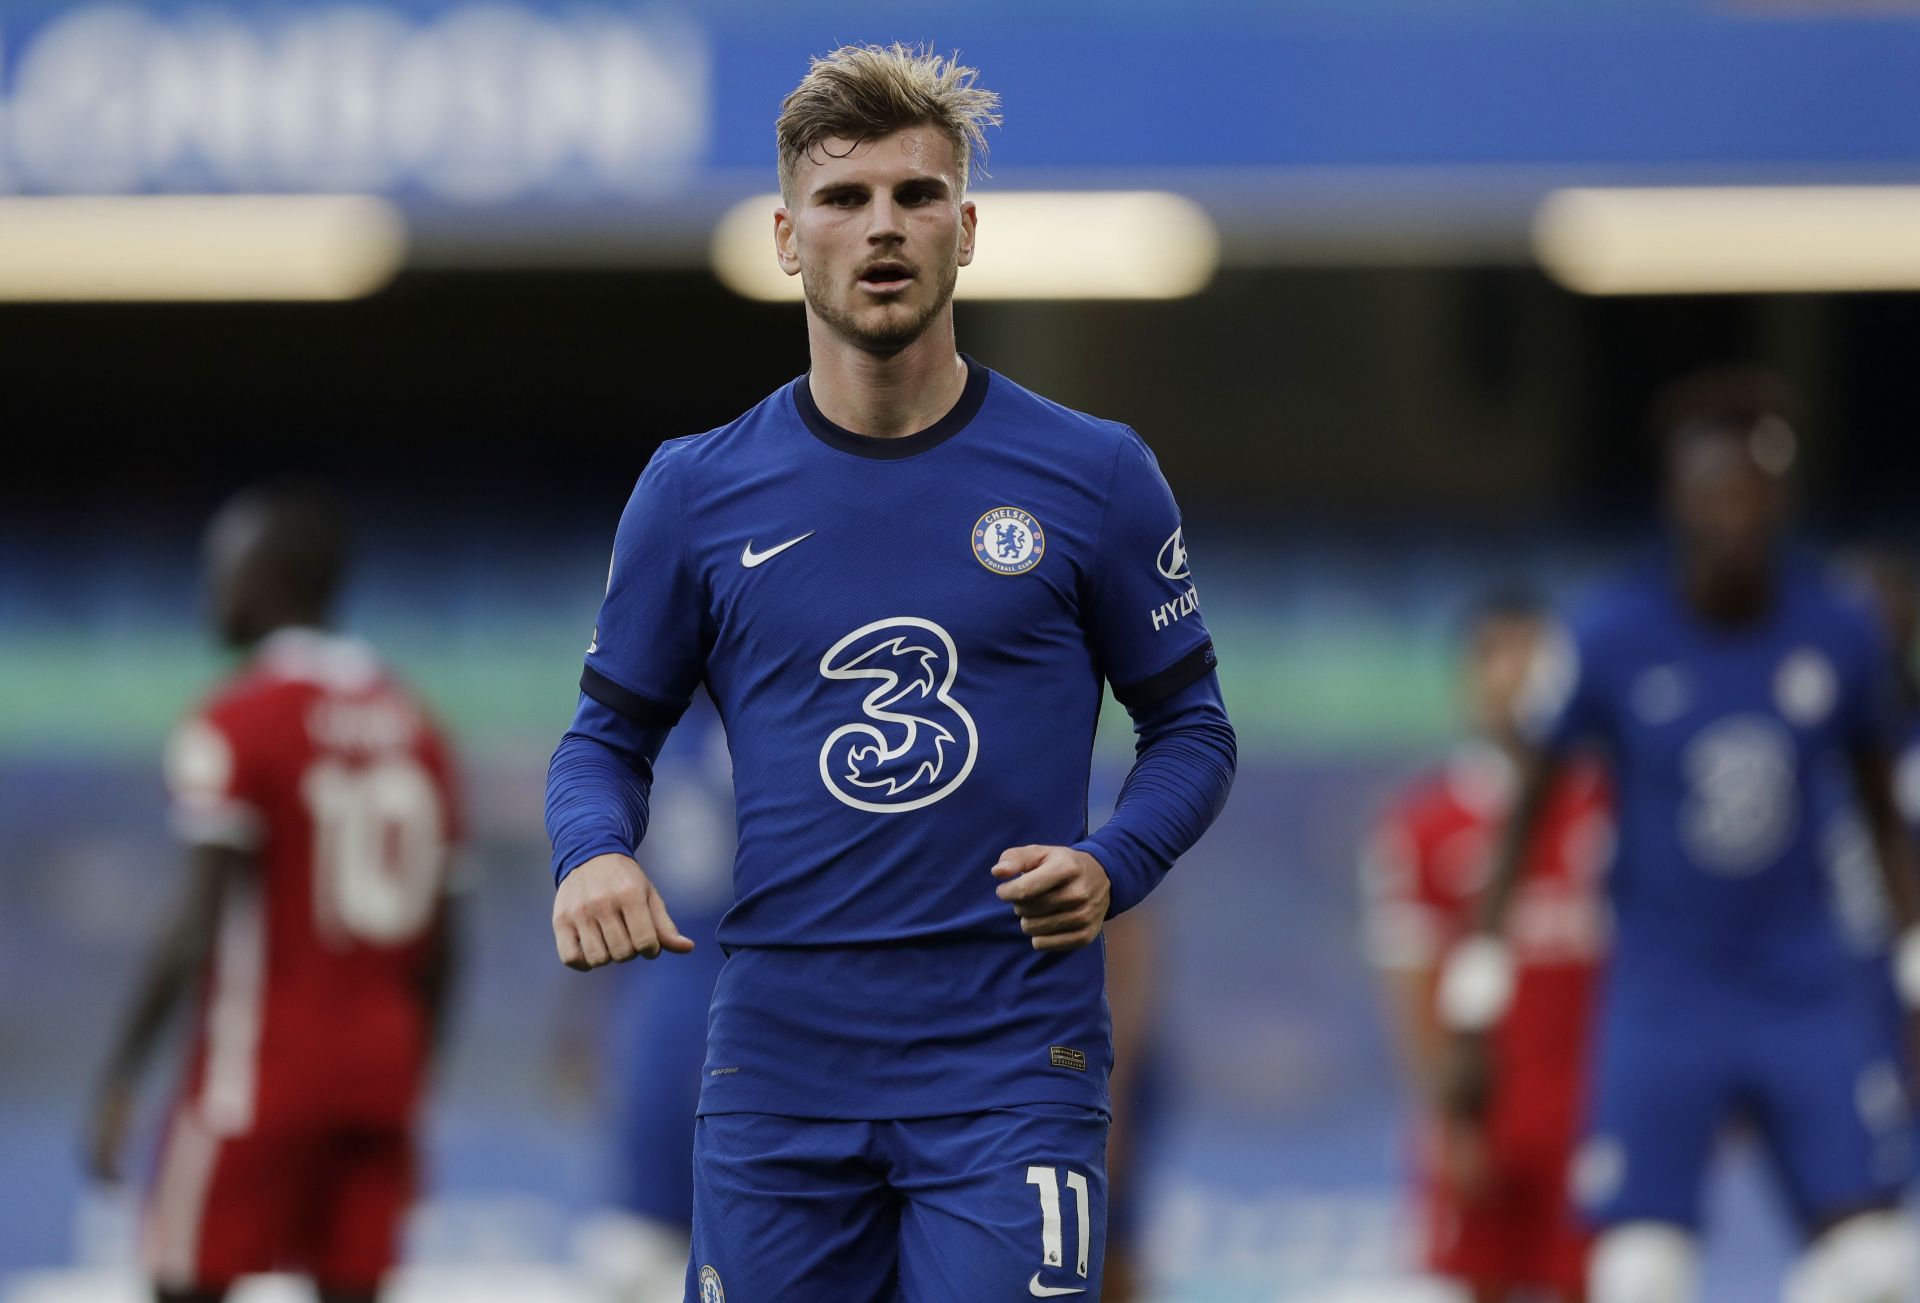 Werner could have headed to Liverpool in 2020